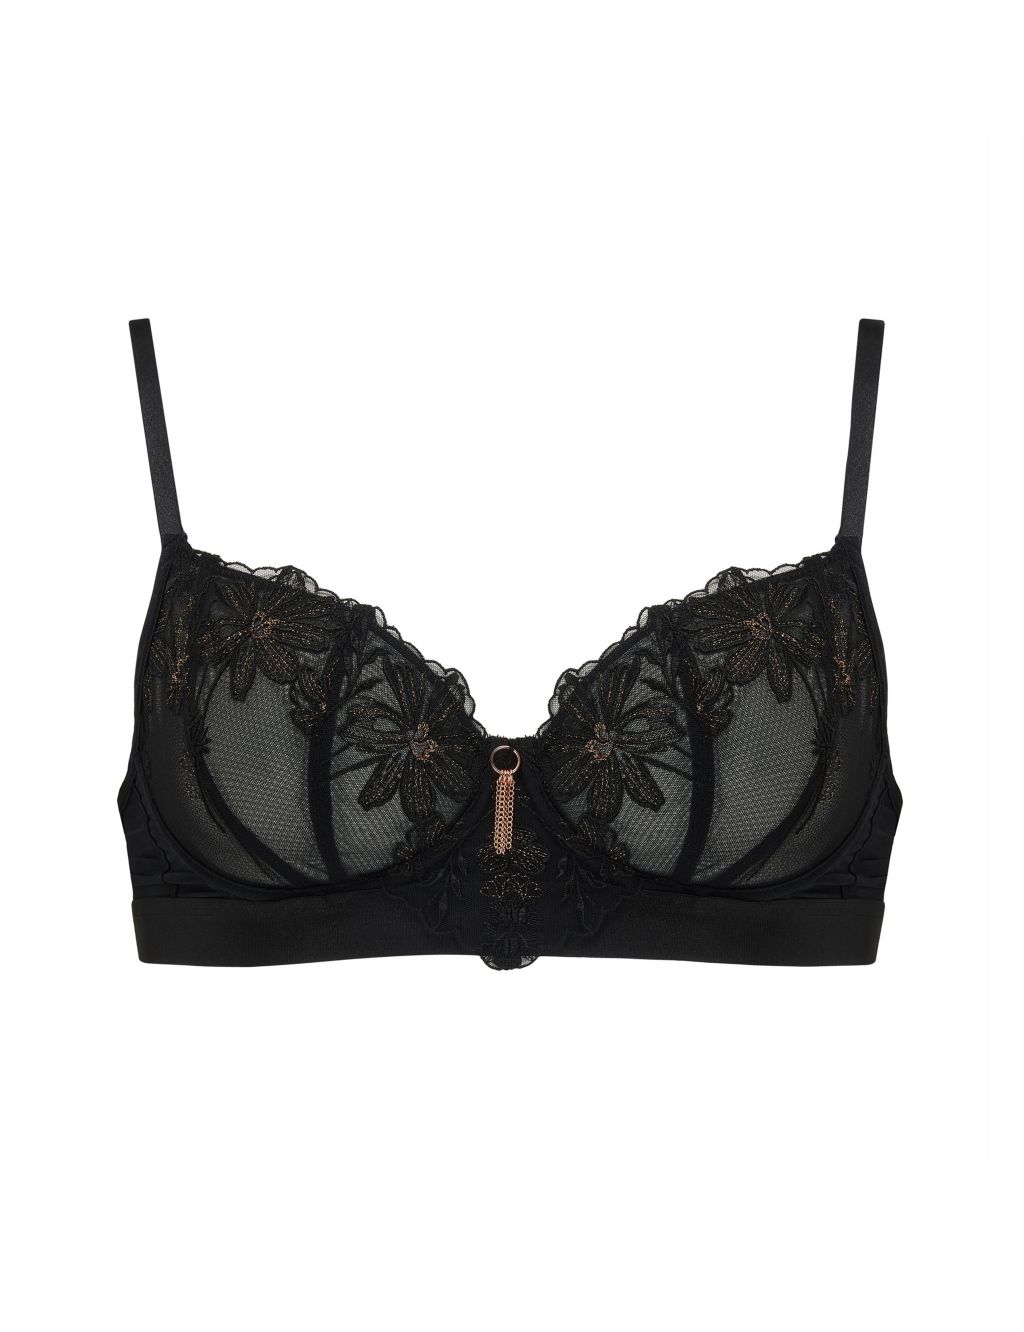 Constance Wired Balcony Bra C-GG | Pour Moi | M&S